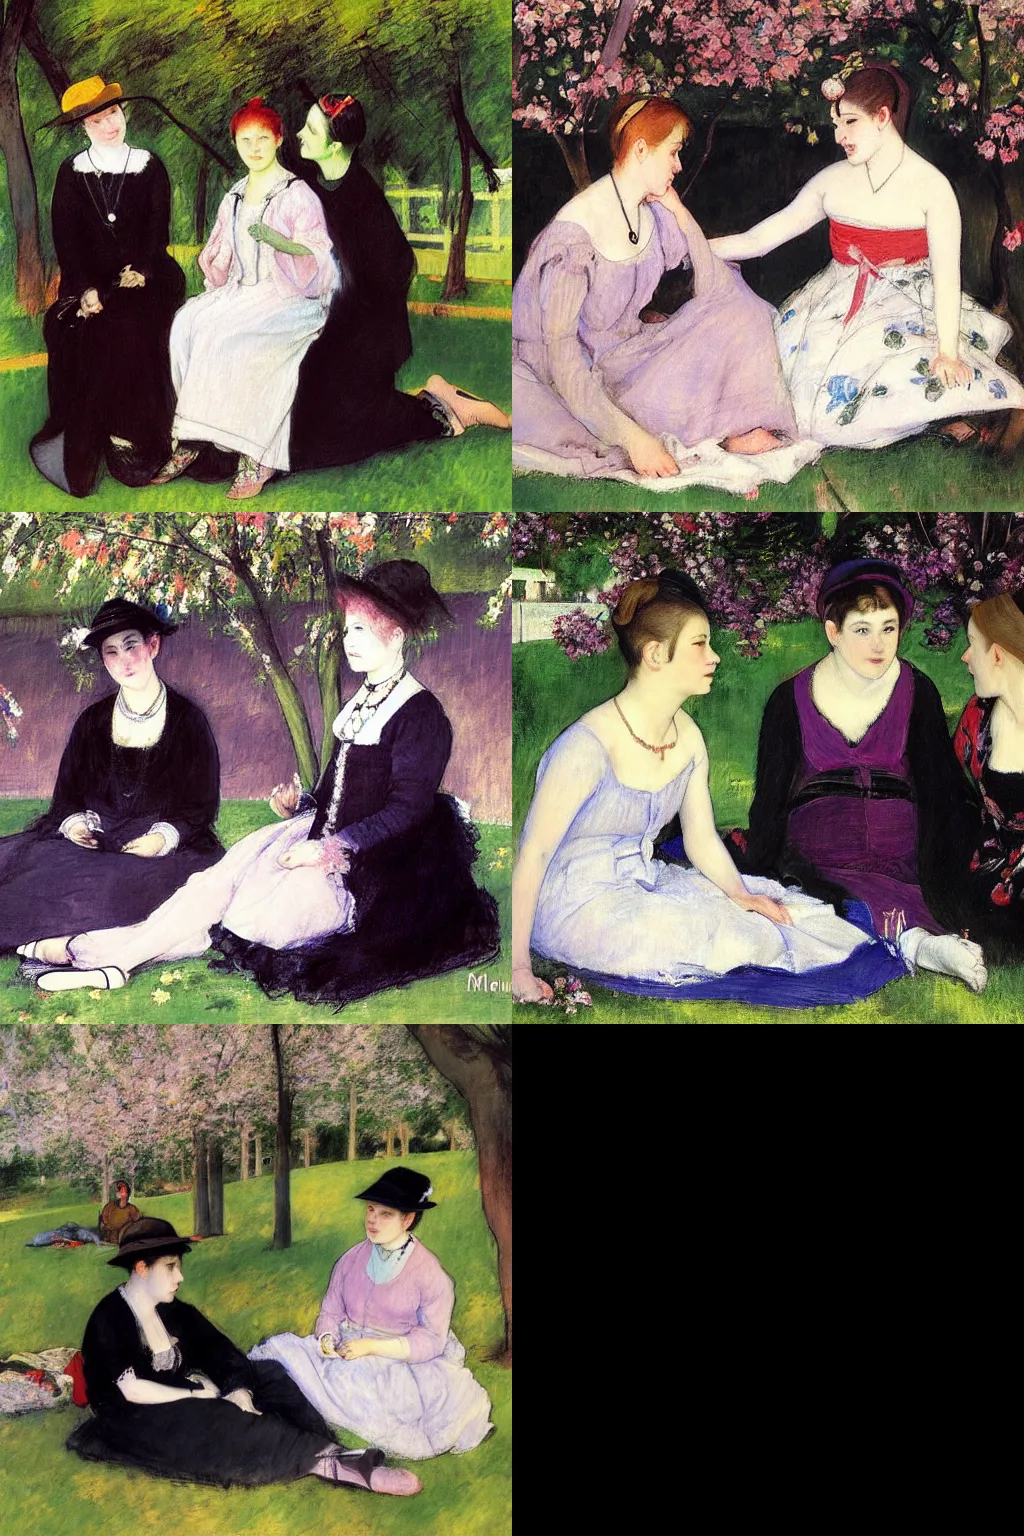 Prompt: an hd painting by mary cassatt. three goths loitering in the shade, talking beneath a cherry tree outside a blockbuster video store.